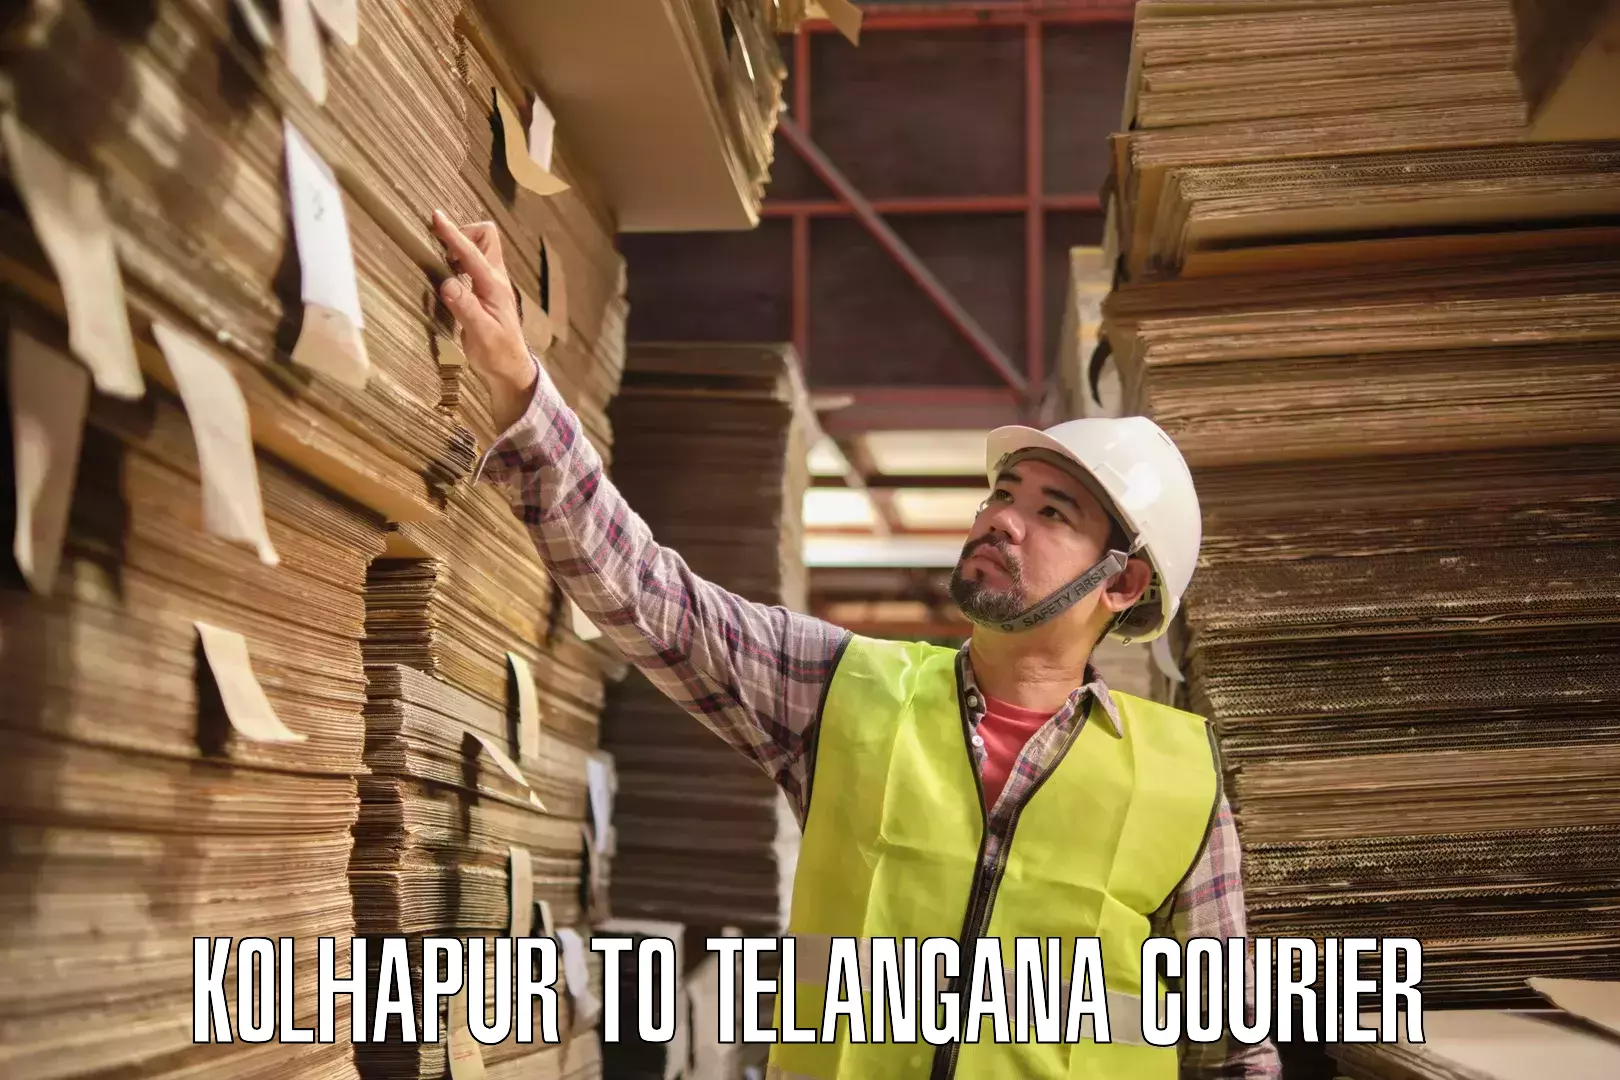 Courier service partnerships Kolhapur to Manneguda